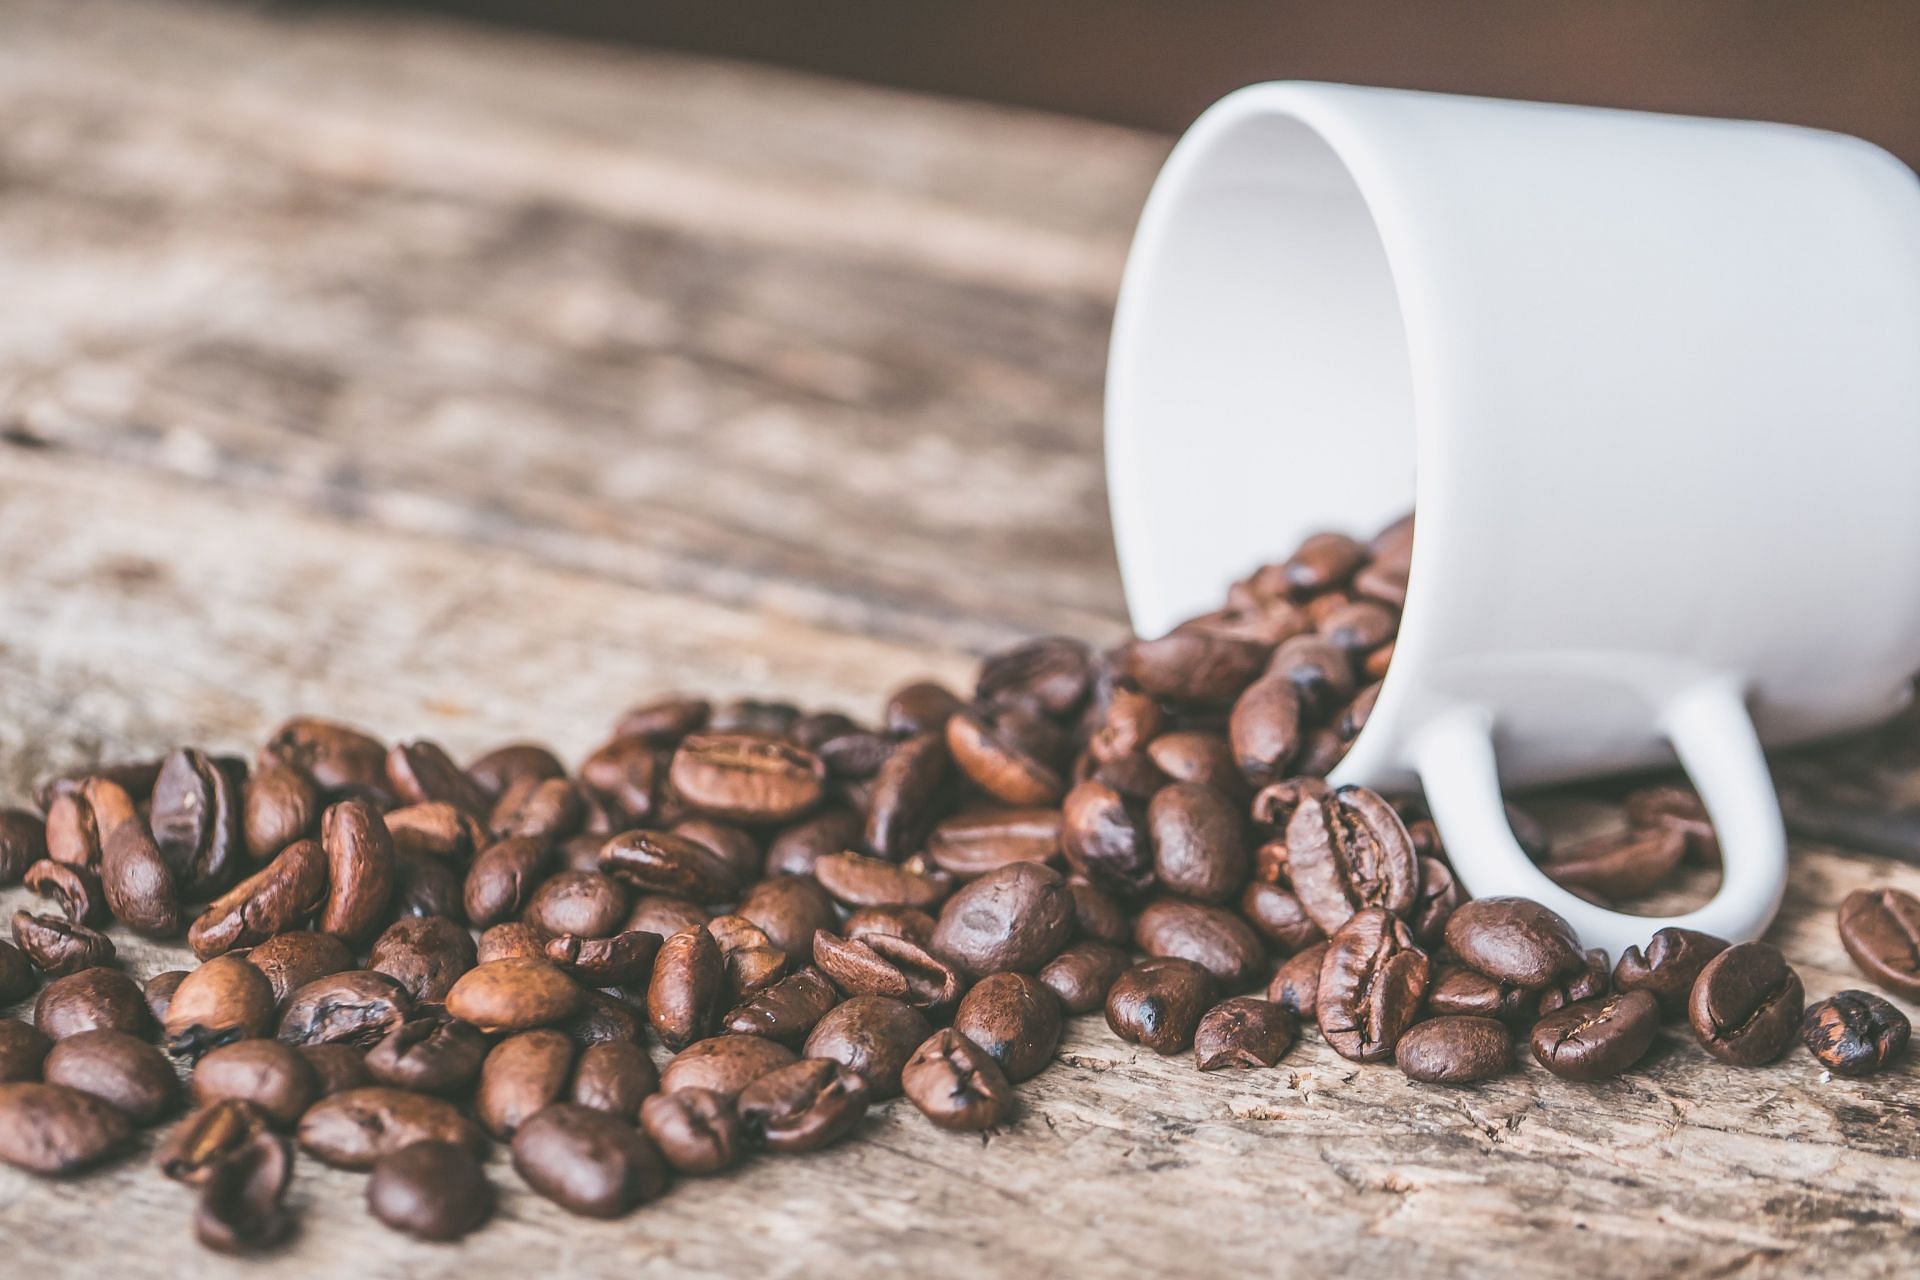 Is Coffee Healthy? - Why the Arabica Coffee Bean Species Is Best